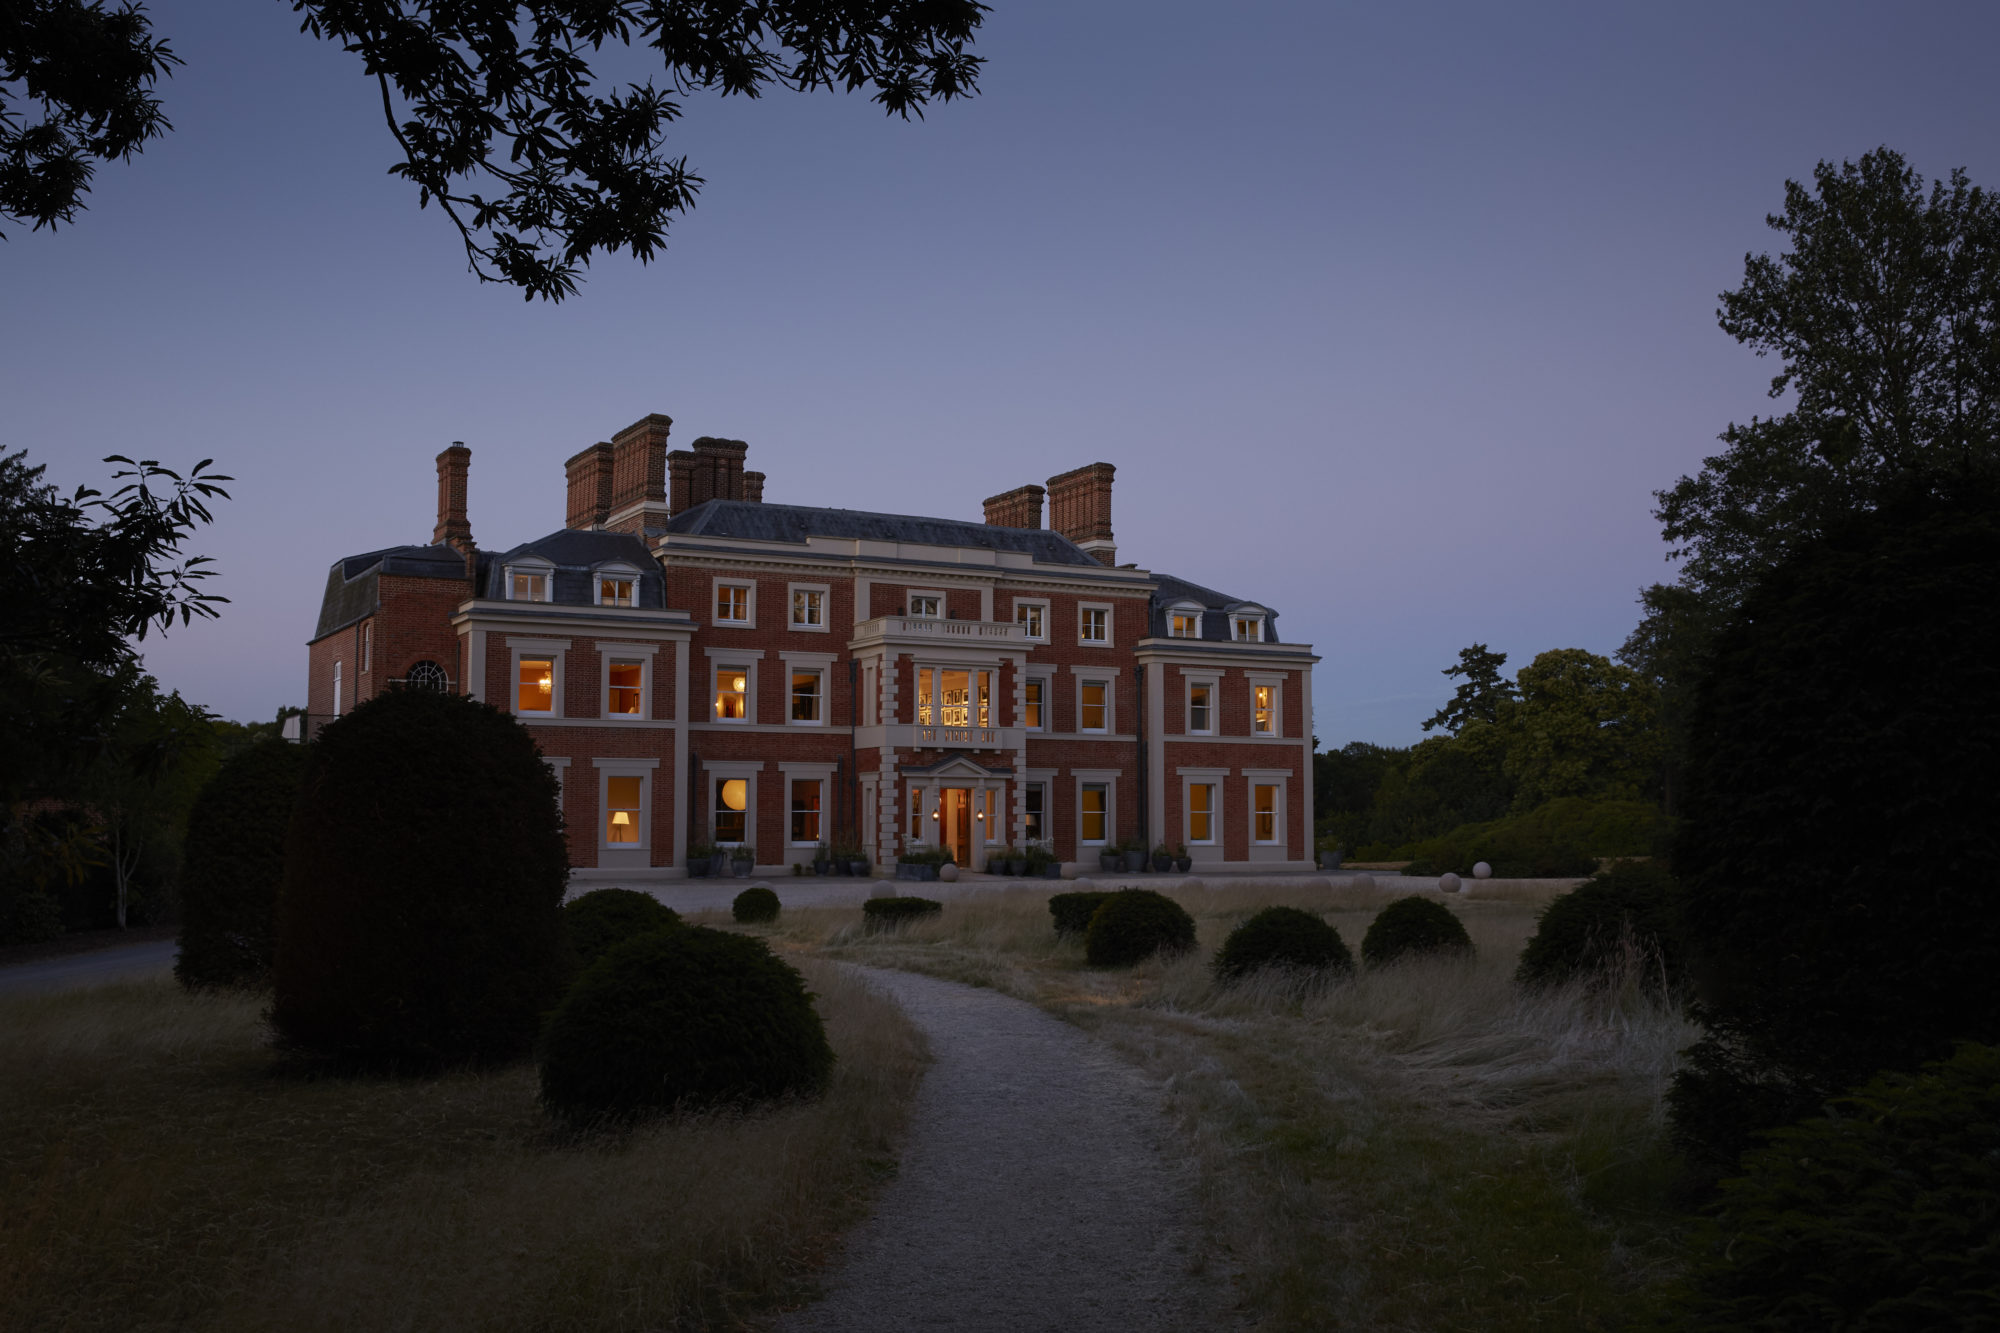 Shot a dawn, the exterior of Heckfield place